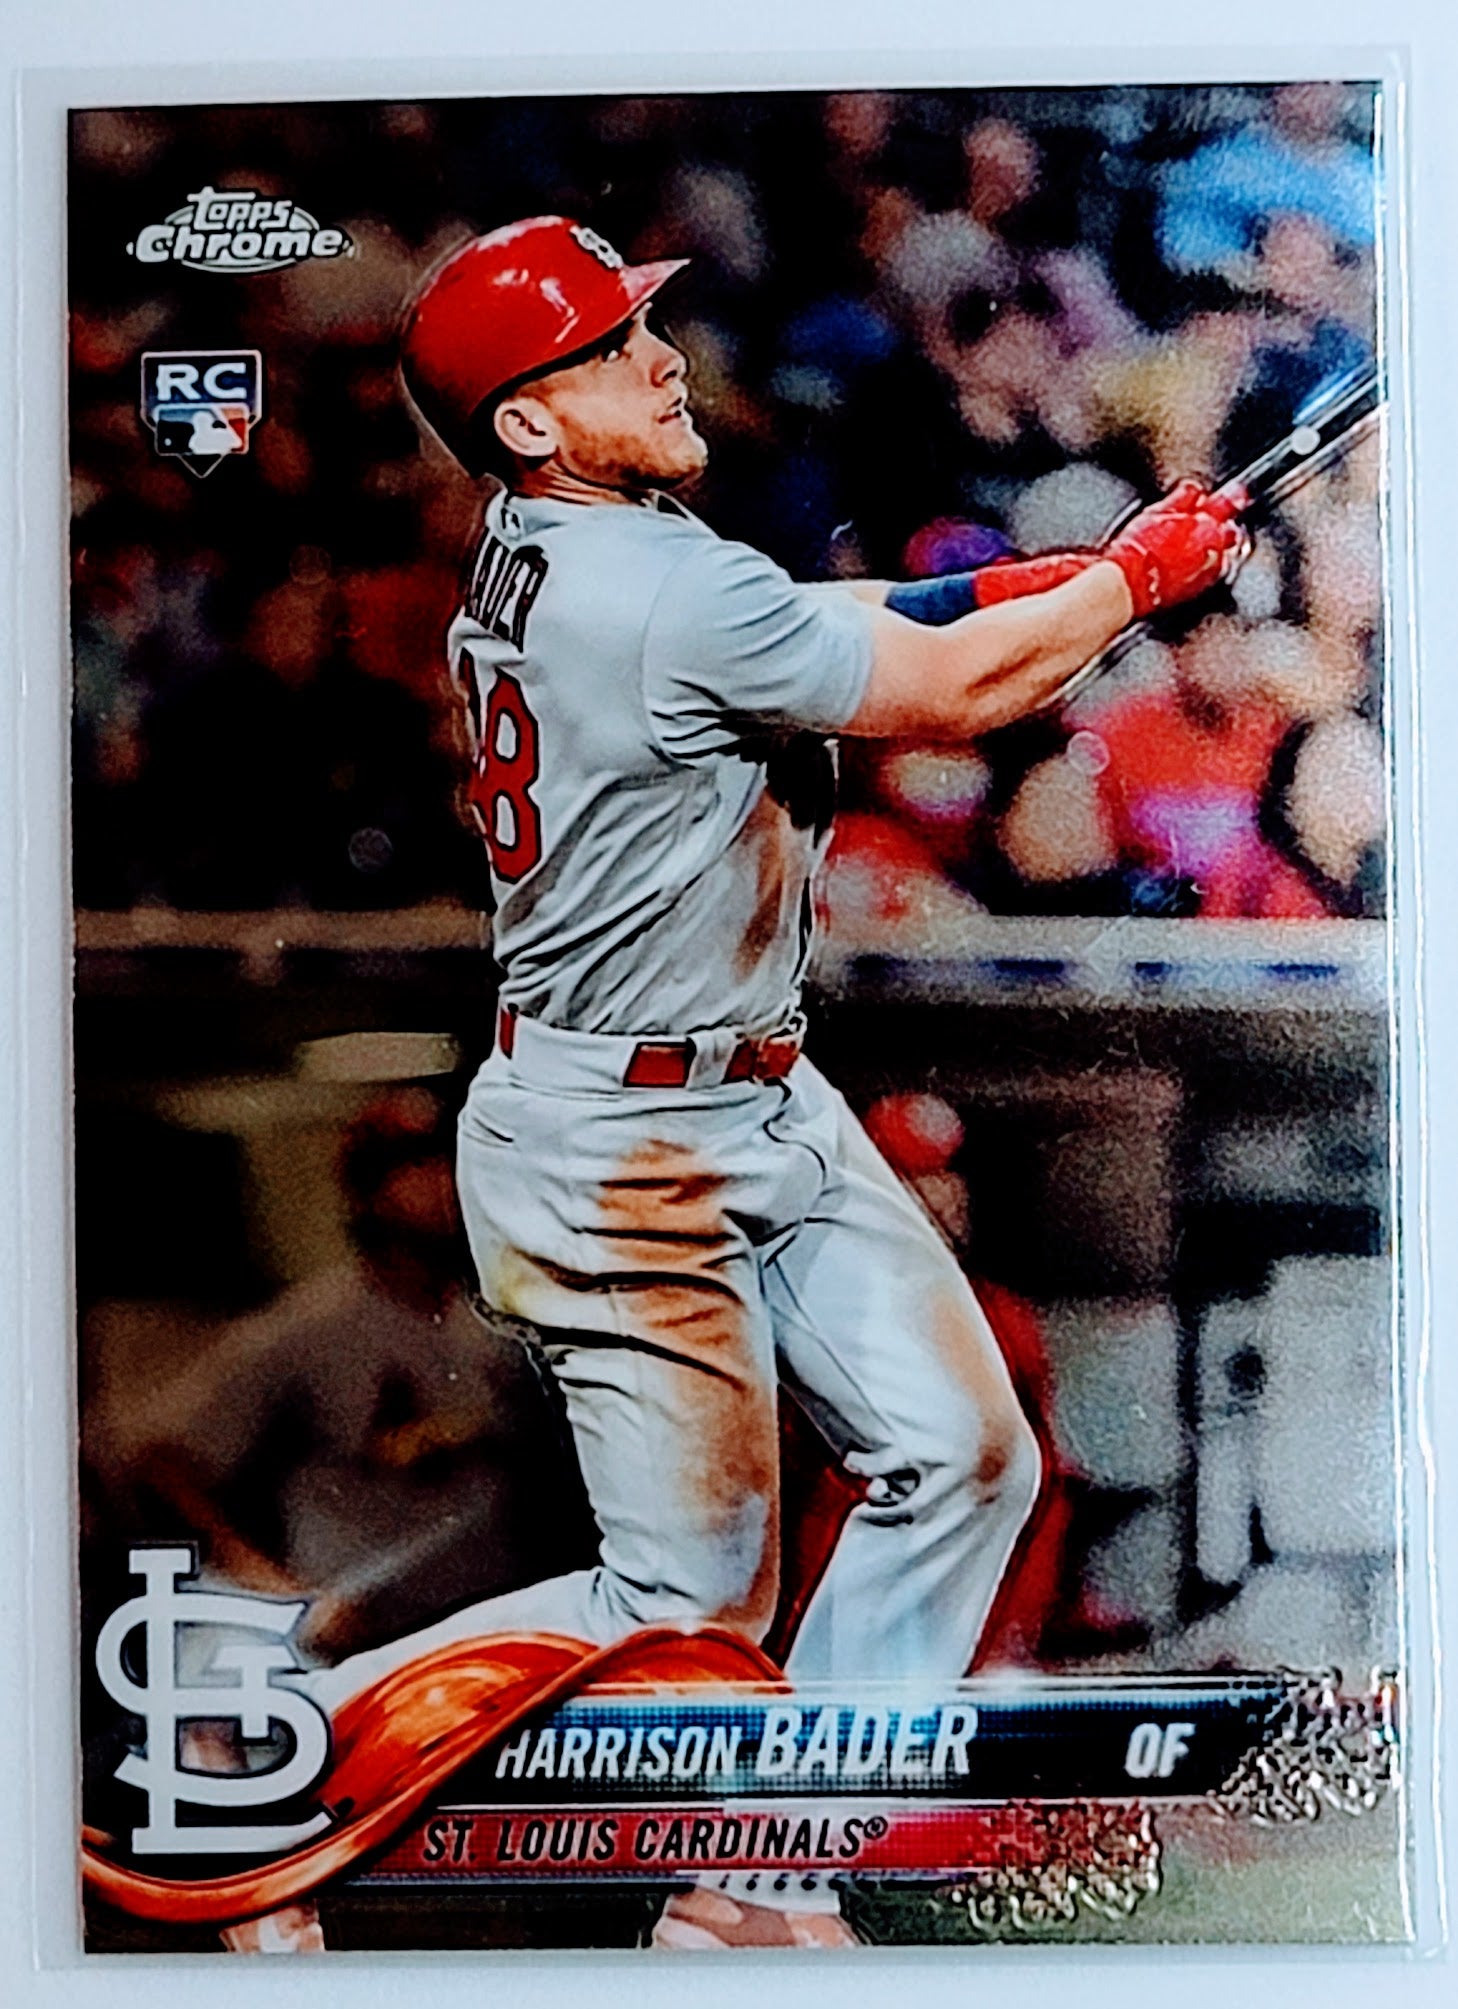 2018 Topps Chrome Harrison
Bader St. Louis
  Cardinals Baseball Card TH1C4 simple Xclusive Collectibles   